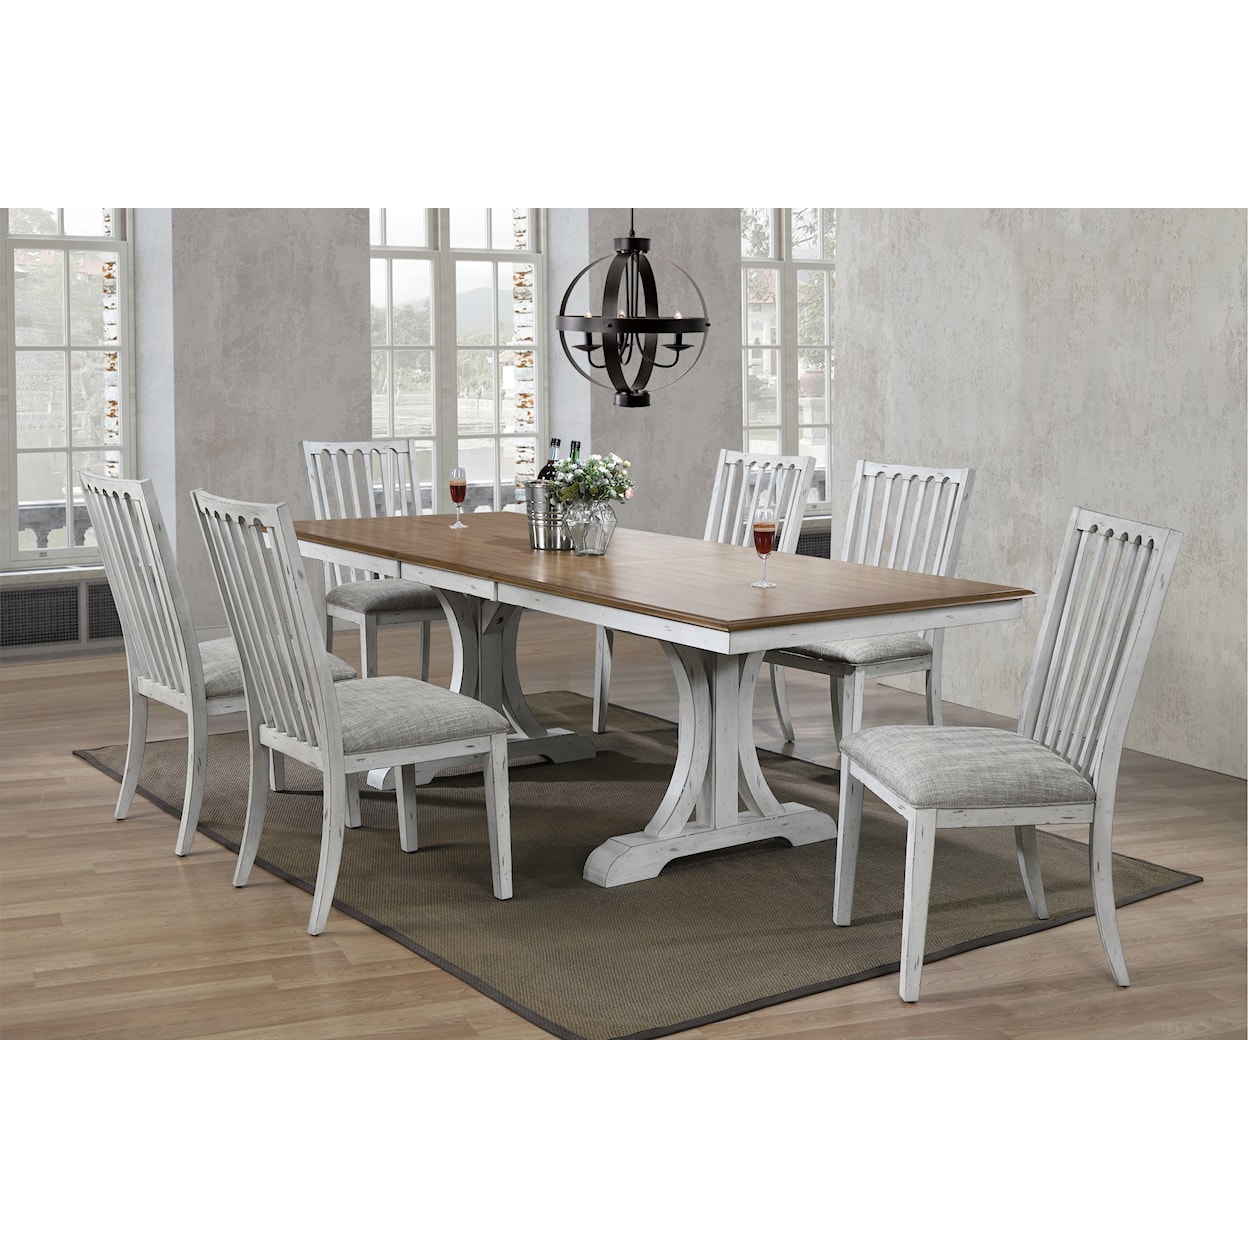 Winners Only Highland Rectangular Dining Room Table